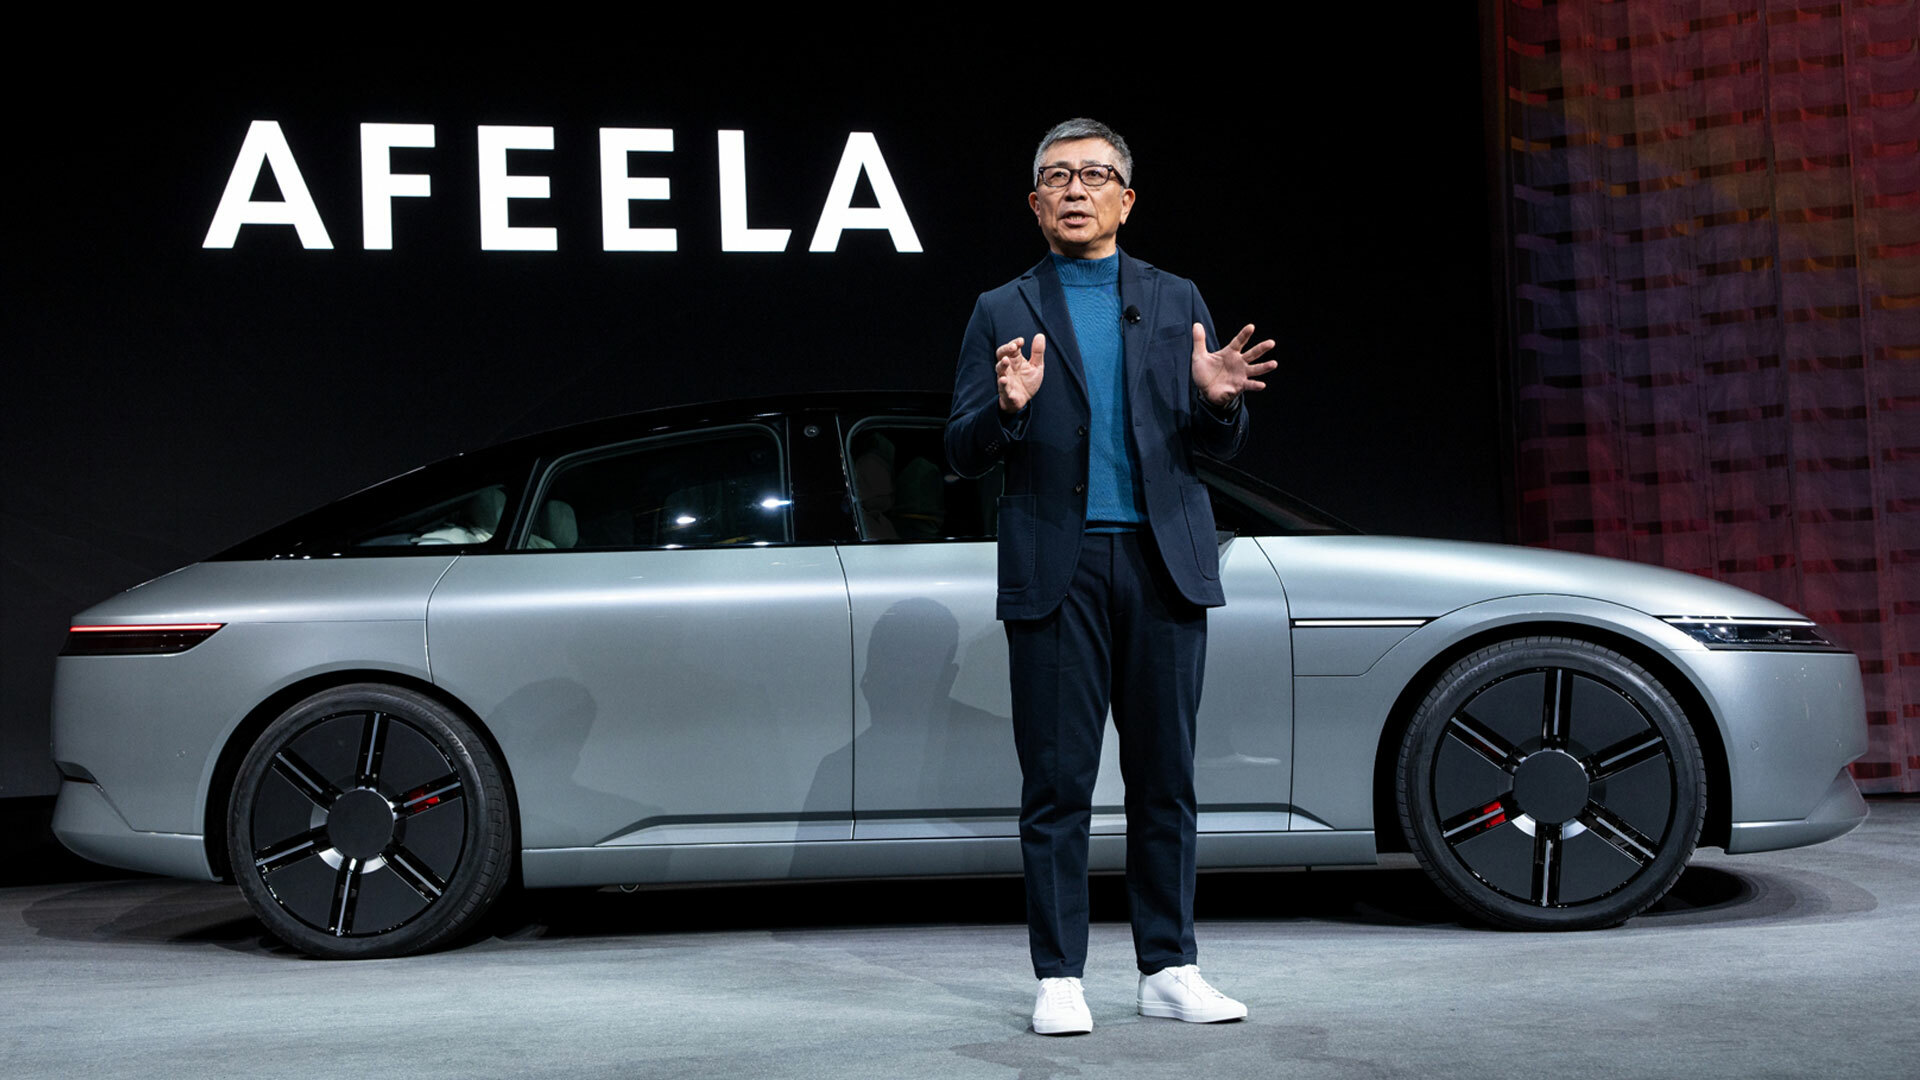 Honda And Sony Announce Afeela Car Brand, Unveil New Prototype